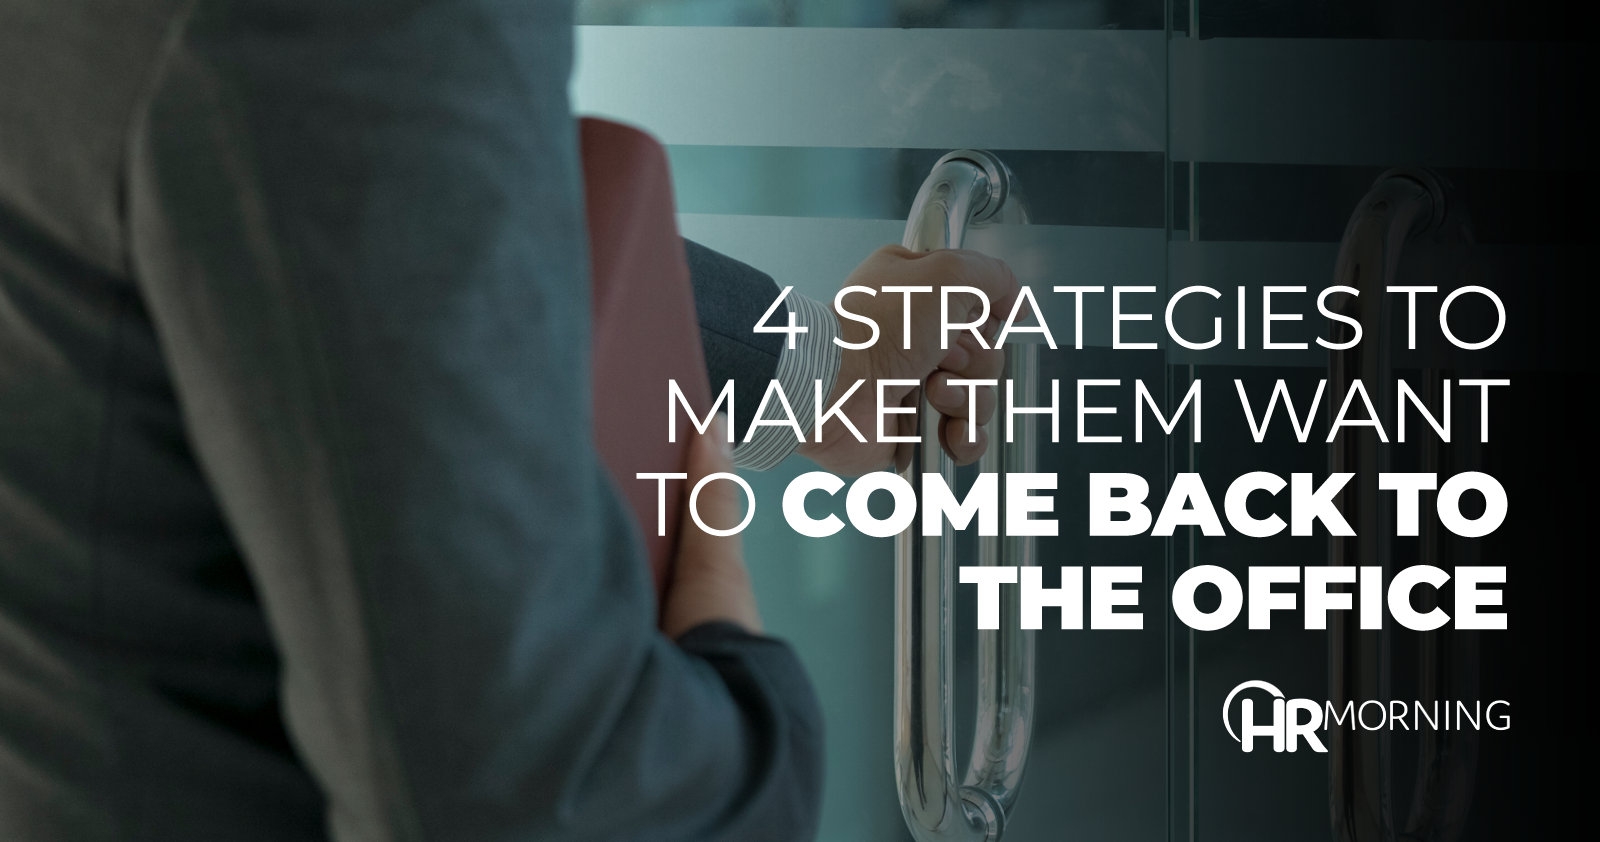 4 Strategies To Make Them Want To Come Back To The Office